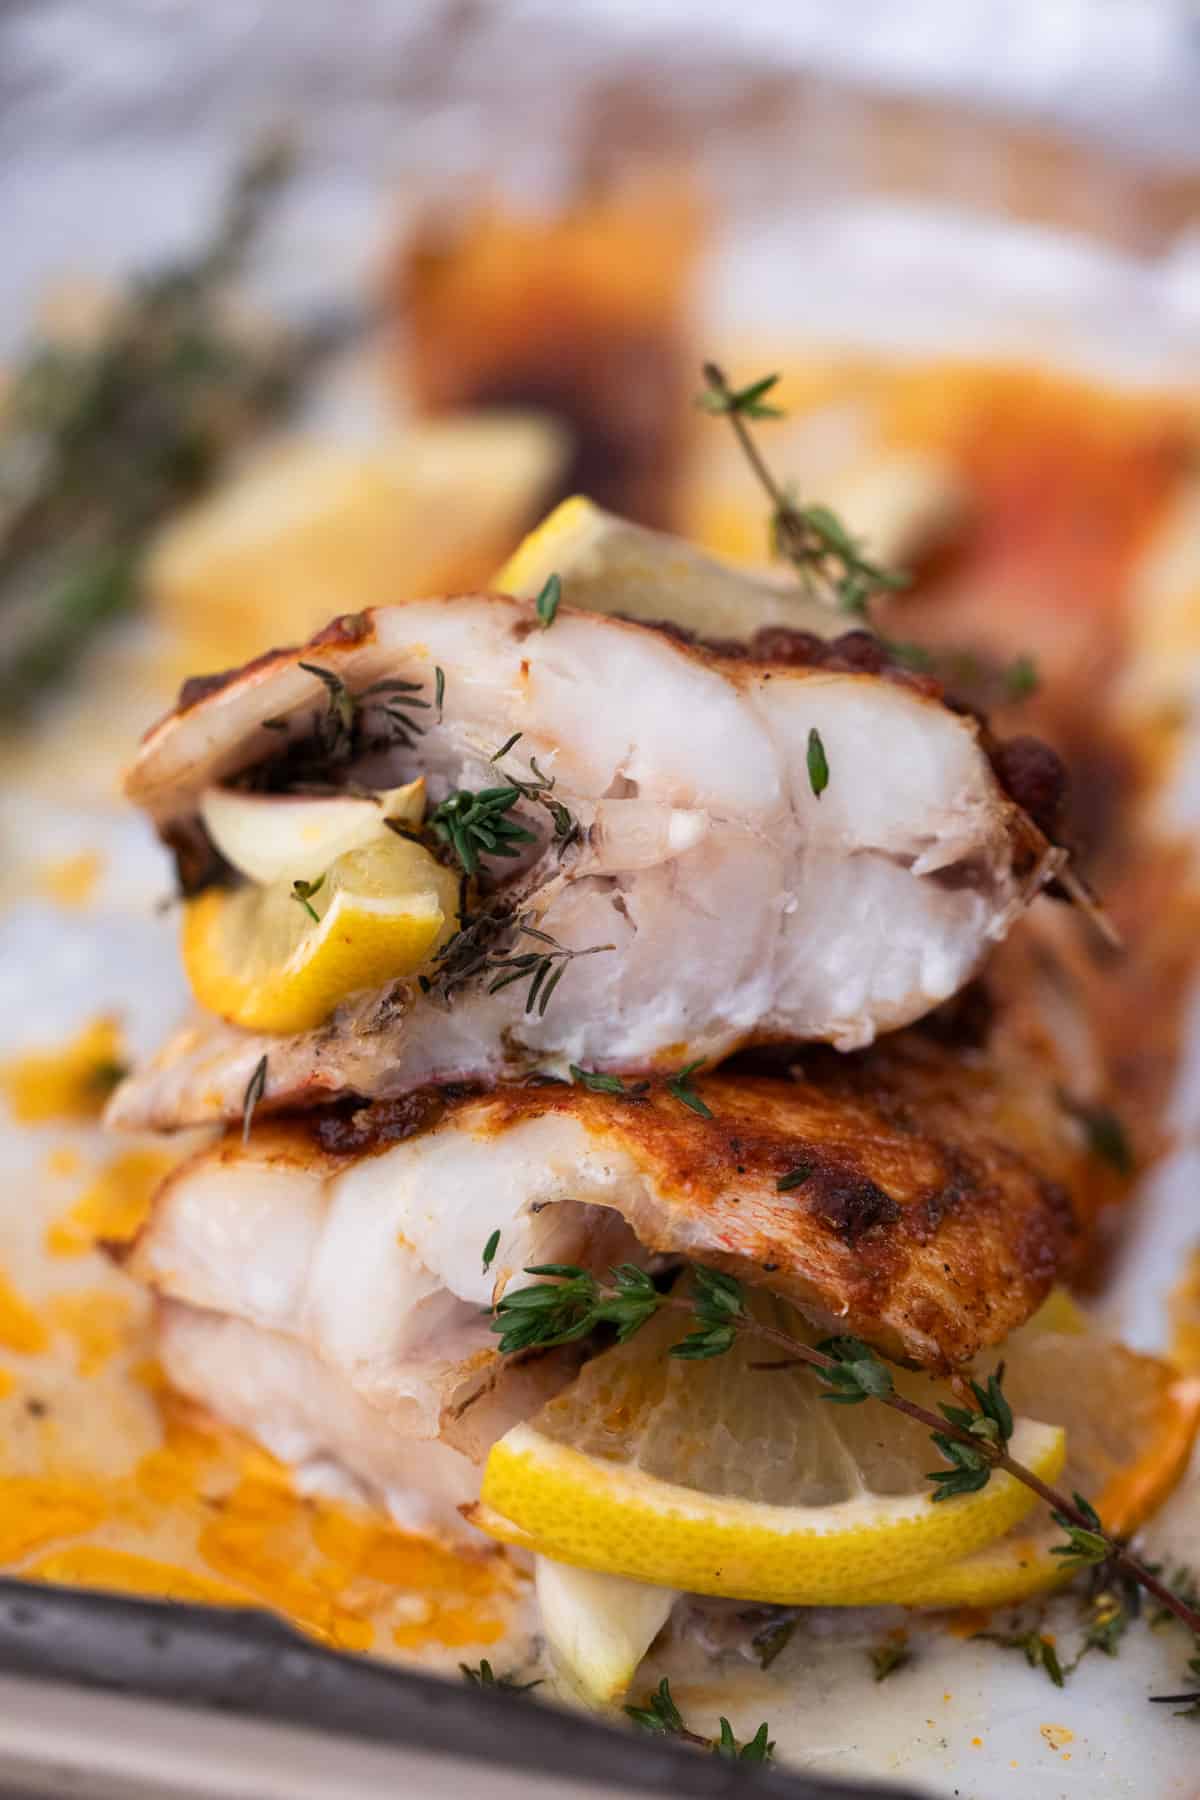 Cross-section of some baked fish with herbs and a lemon slice.